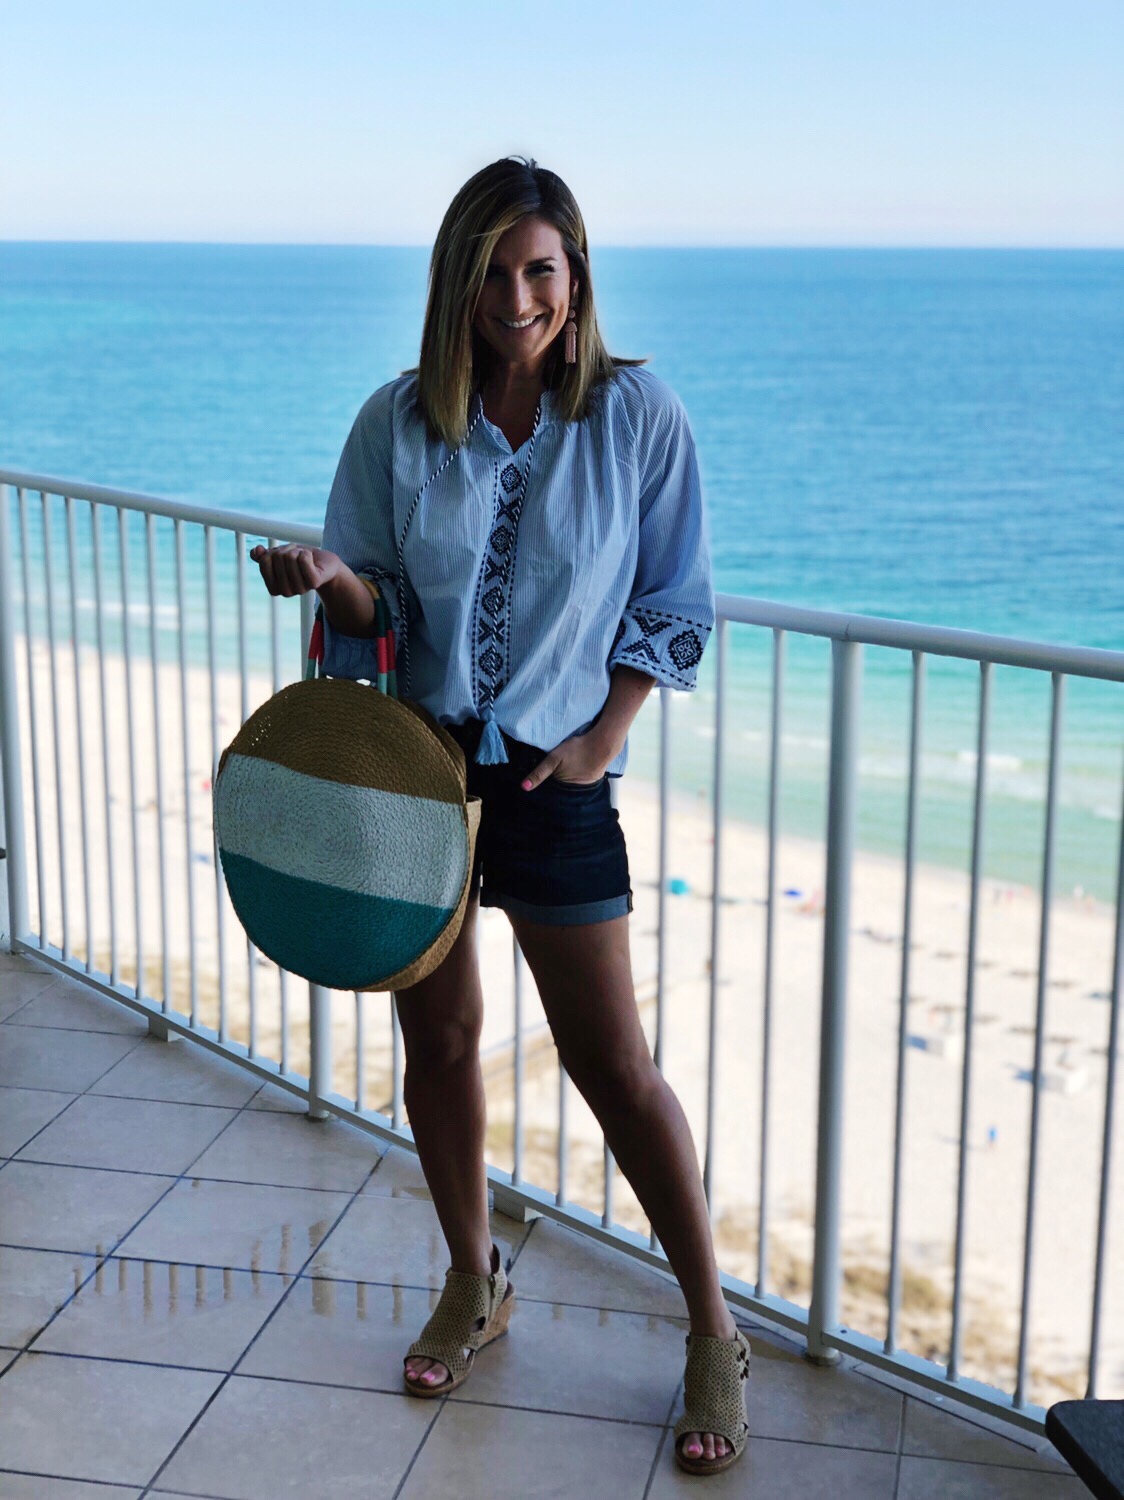 Affordable Summer Outfit // Embroidered Top with Shorts and Circle Bag